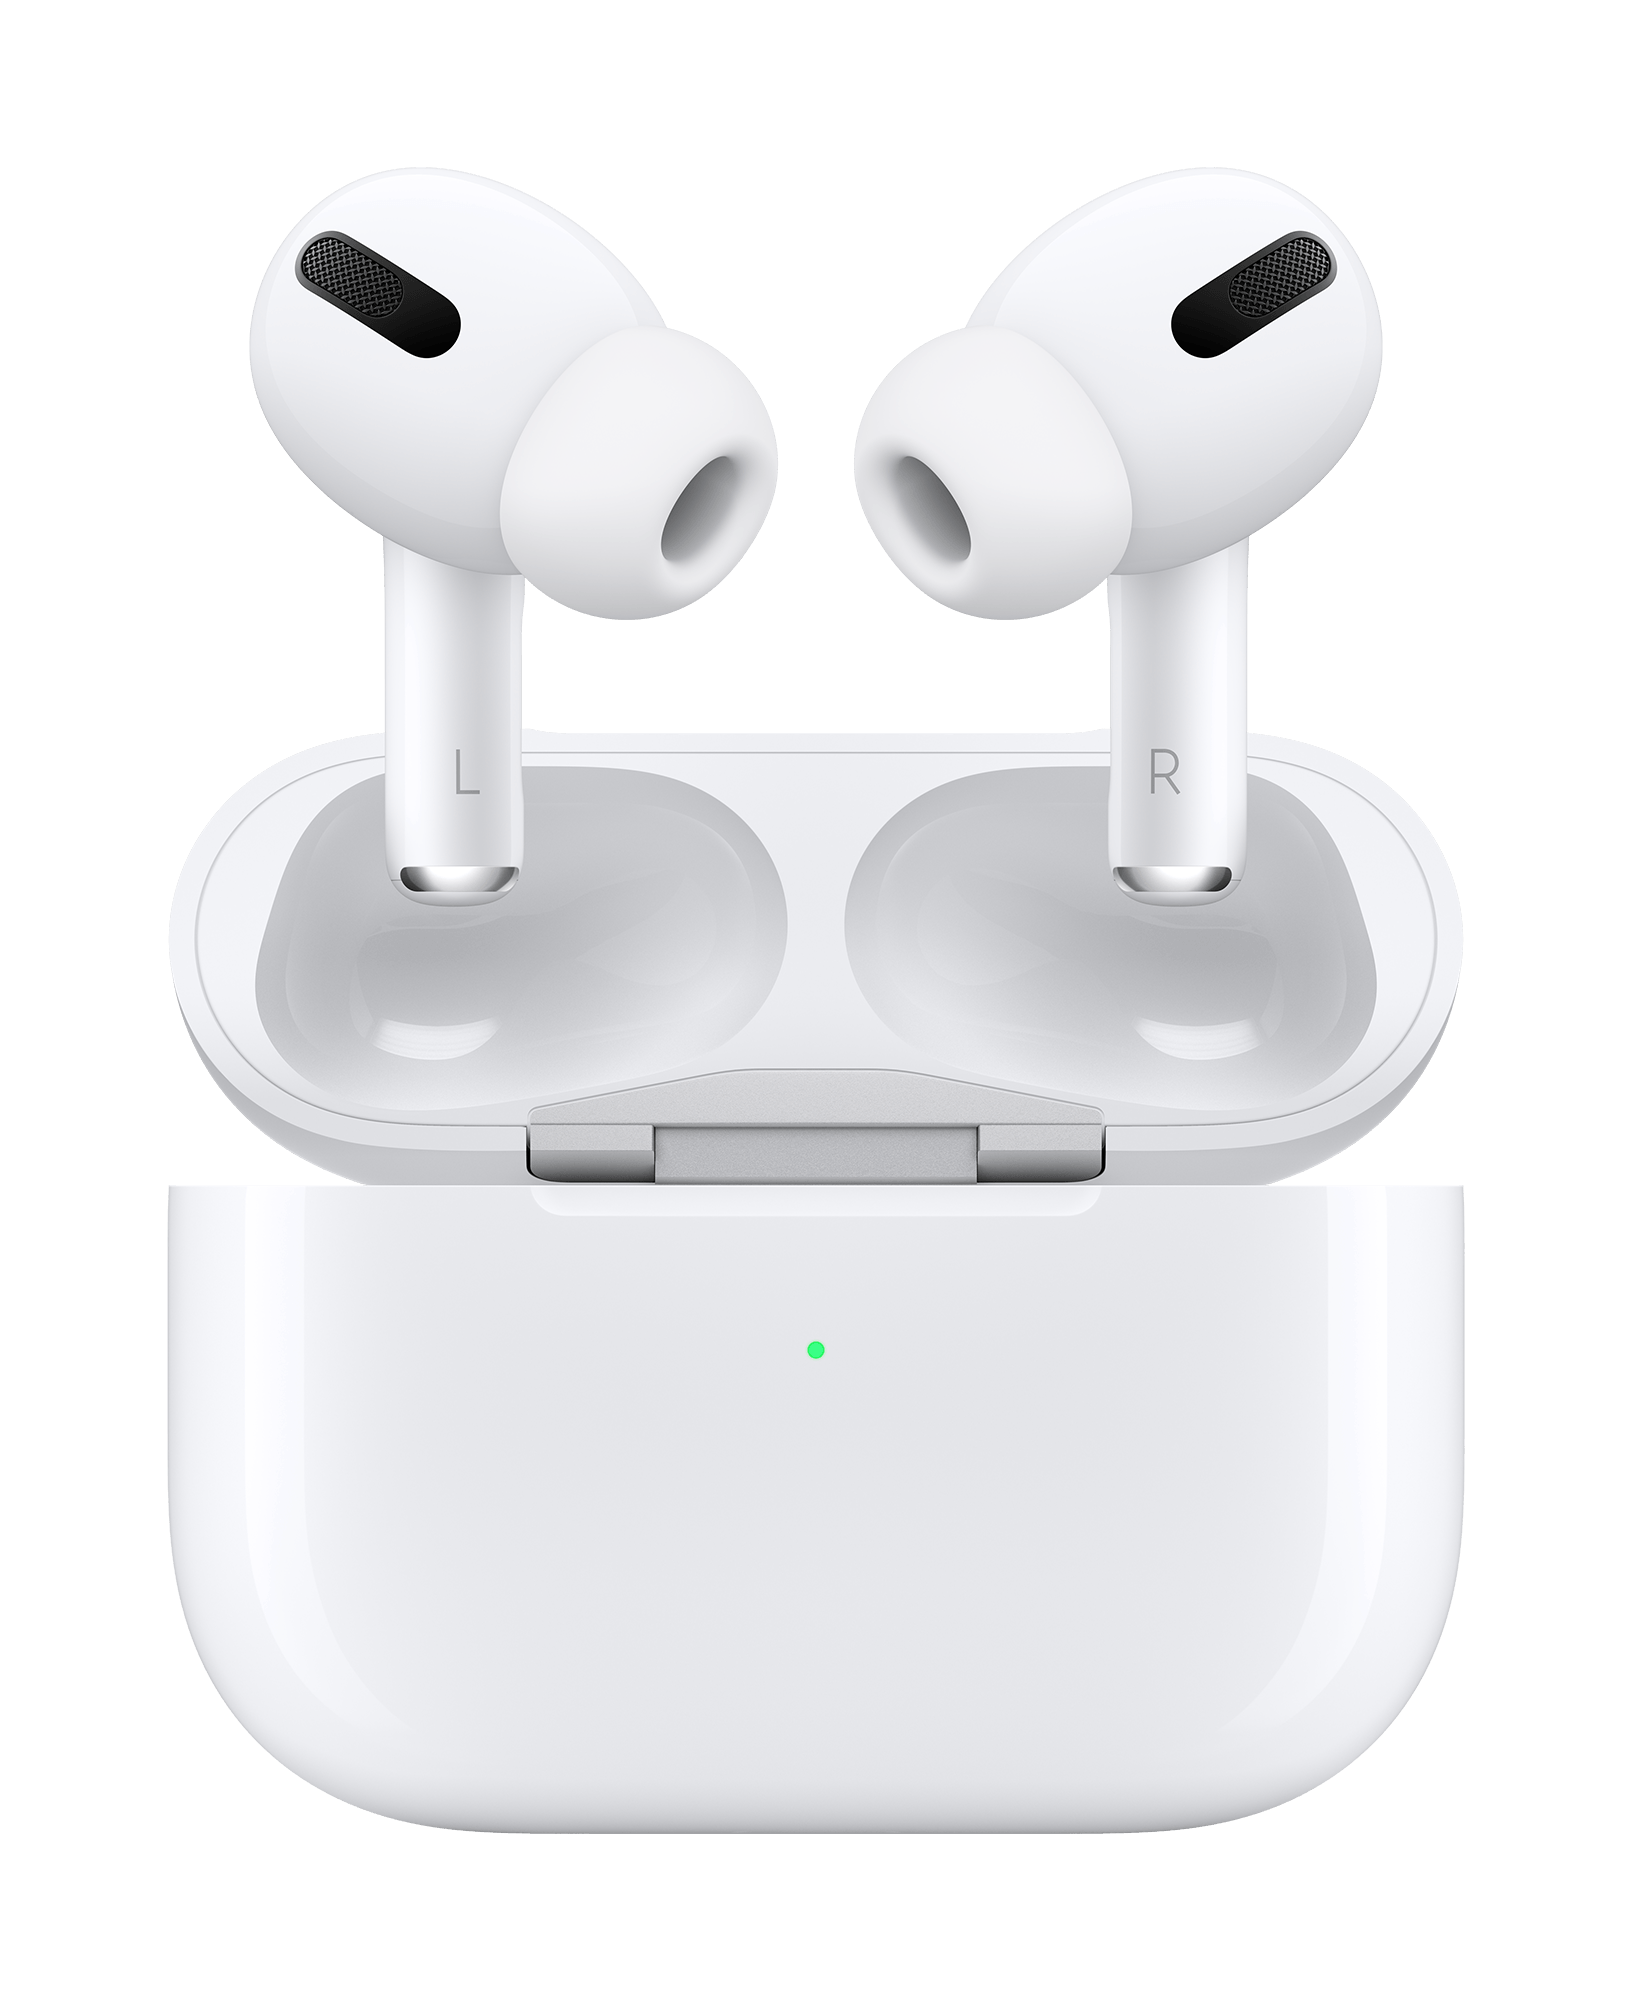 Airpods Free HD Image PNG Image